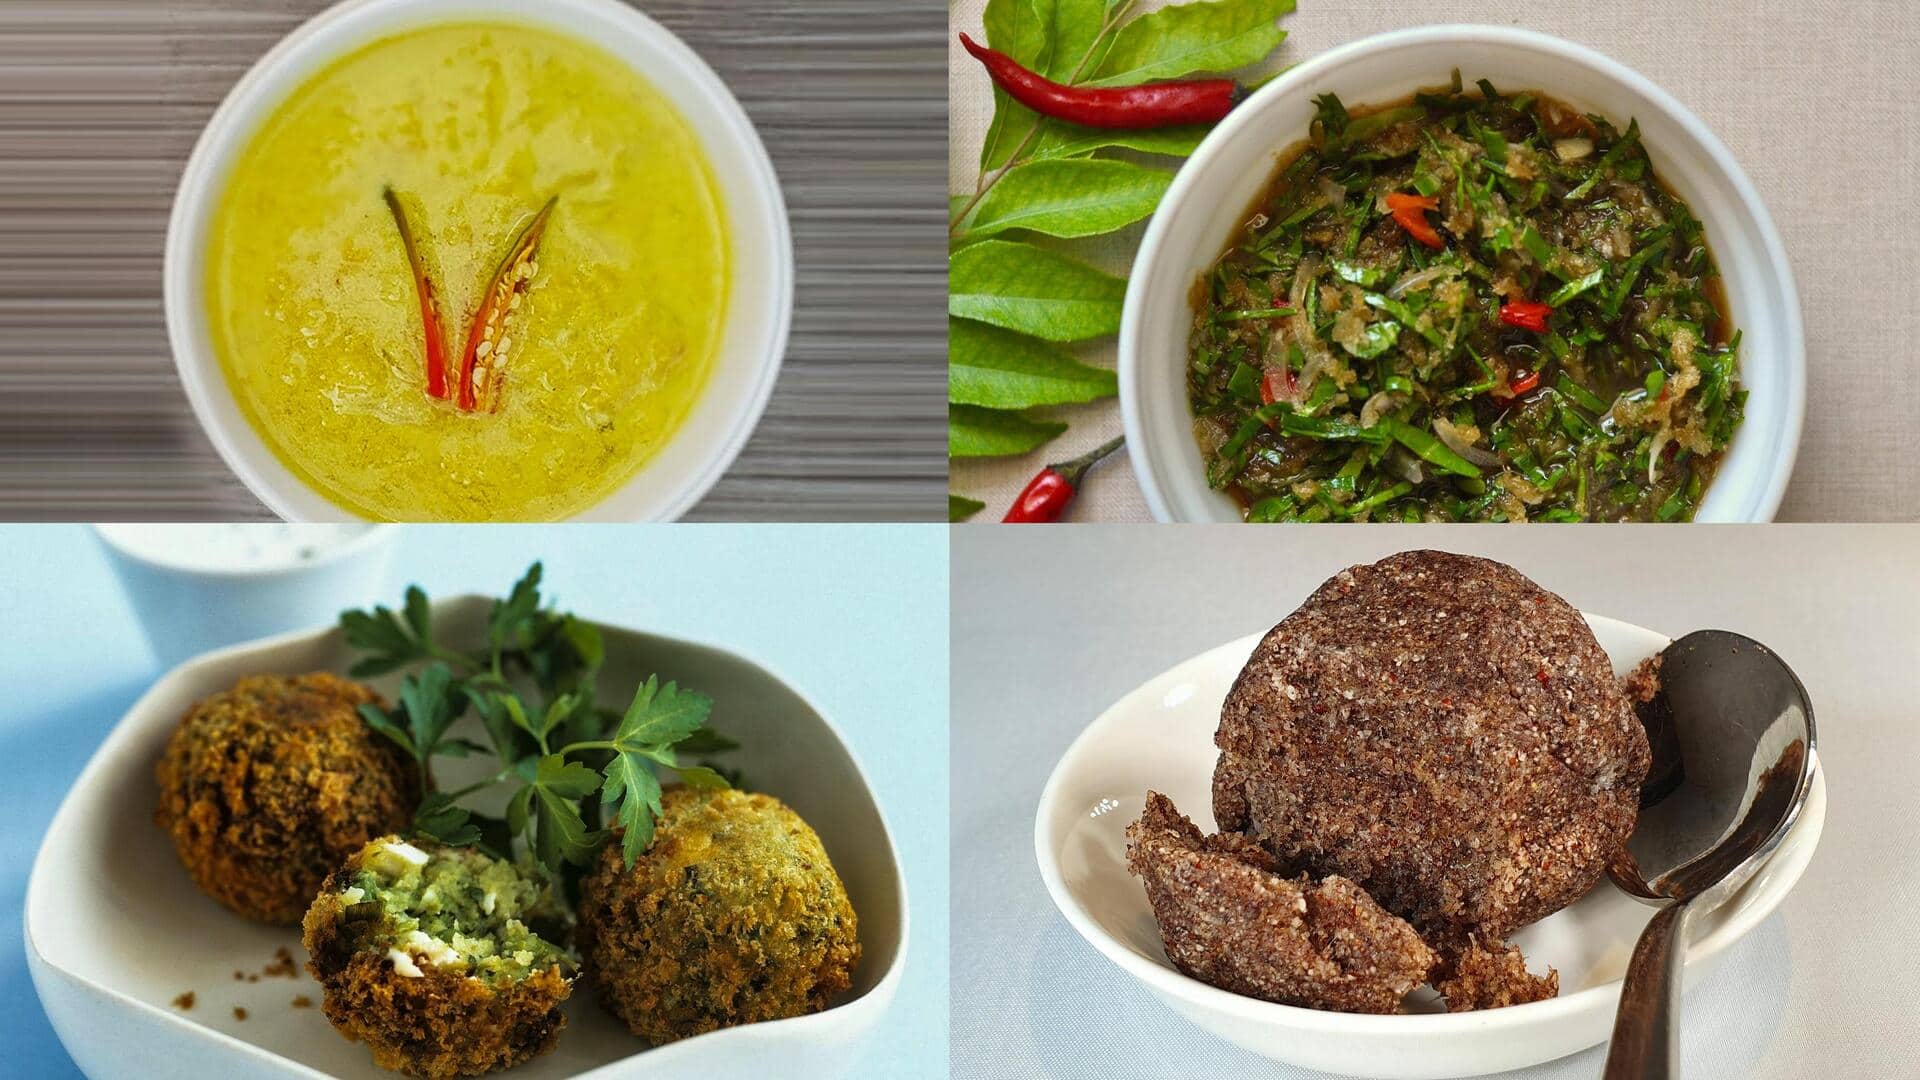 Craving vegetarian food in the Maldives? Here's what to eat